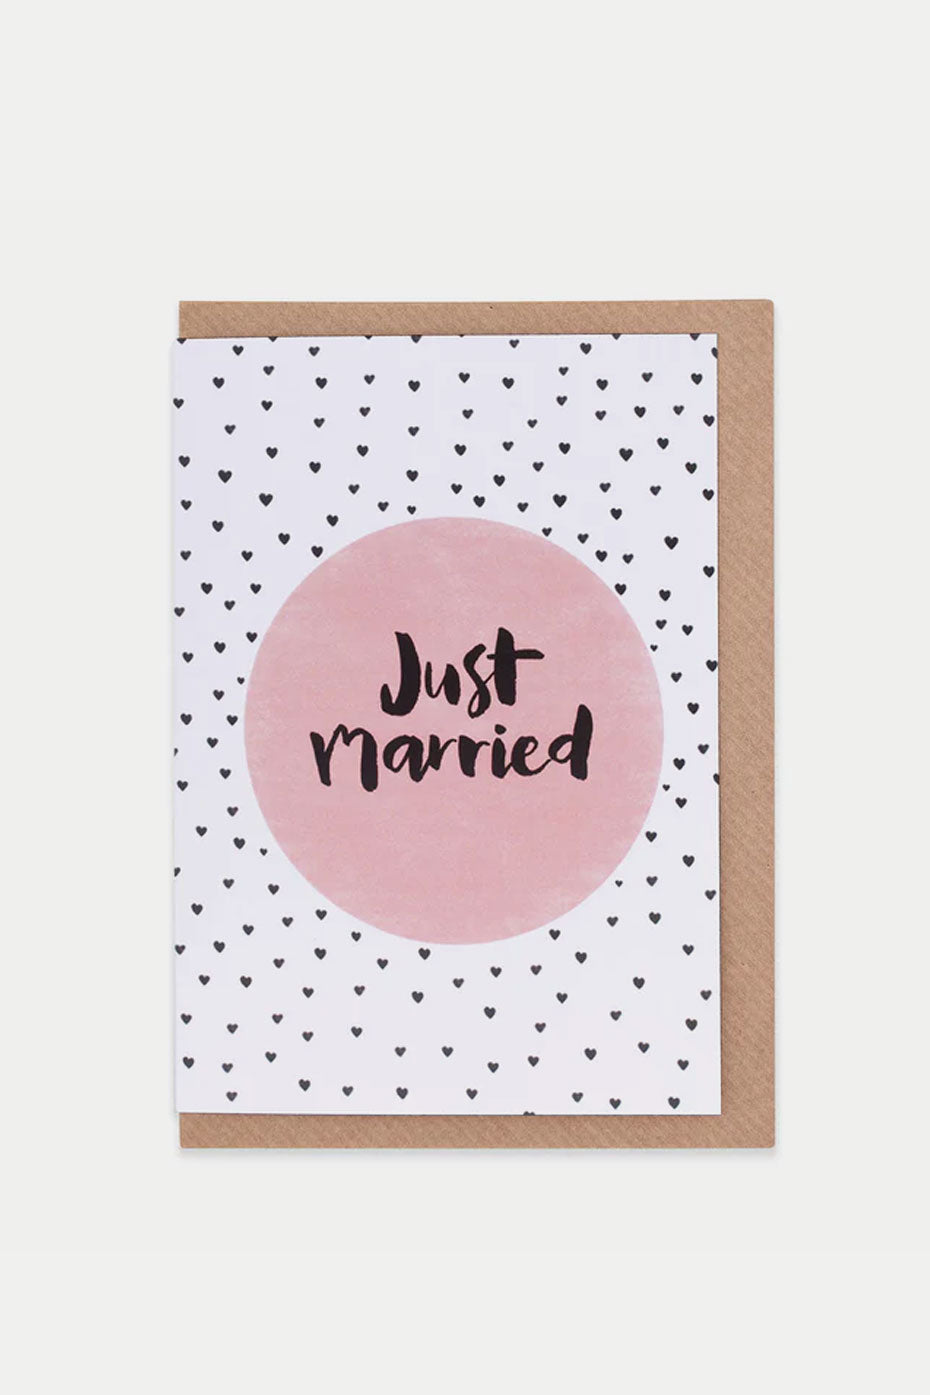 evermade-just-married-card